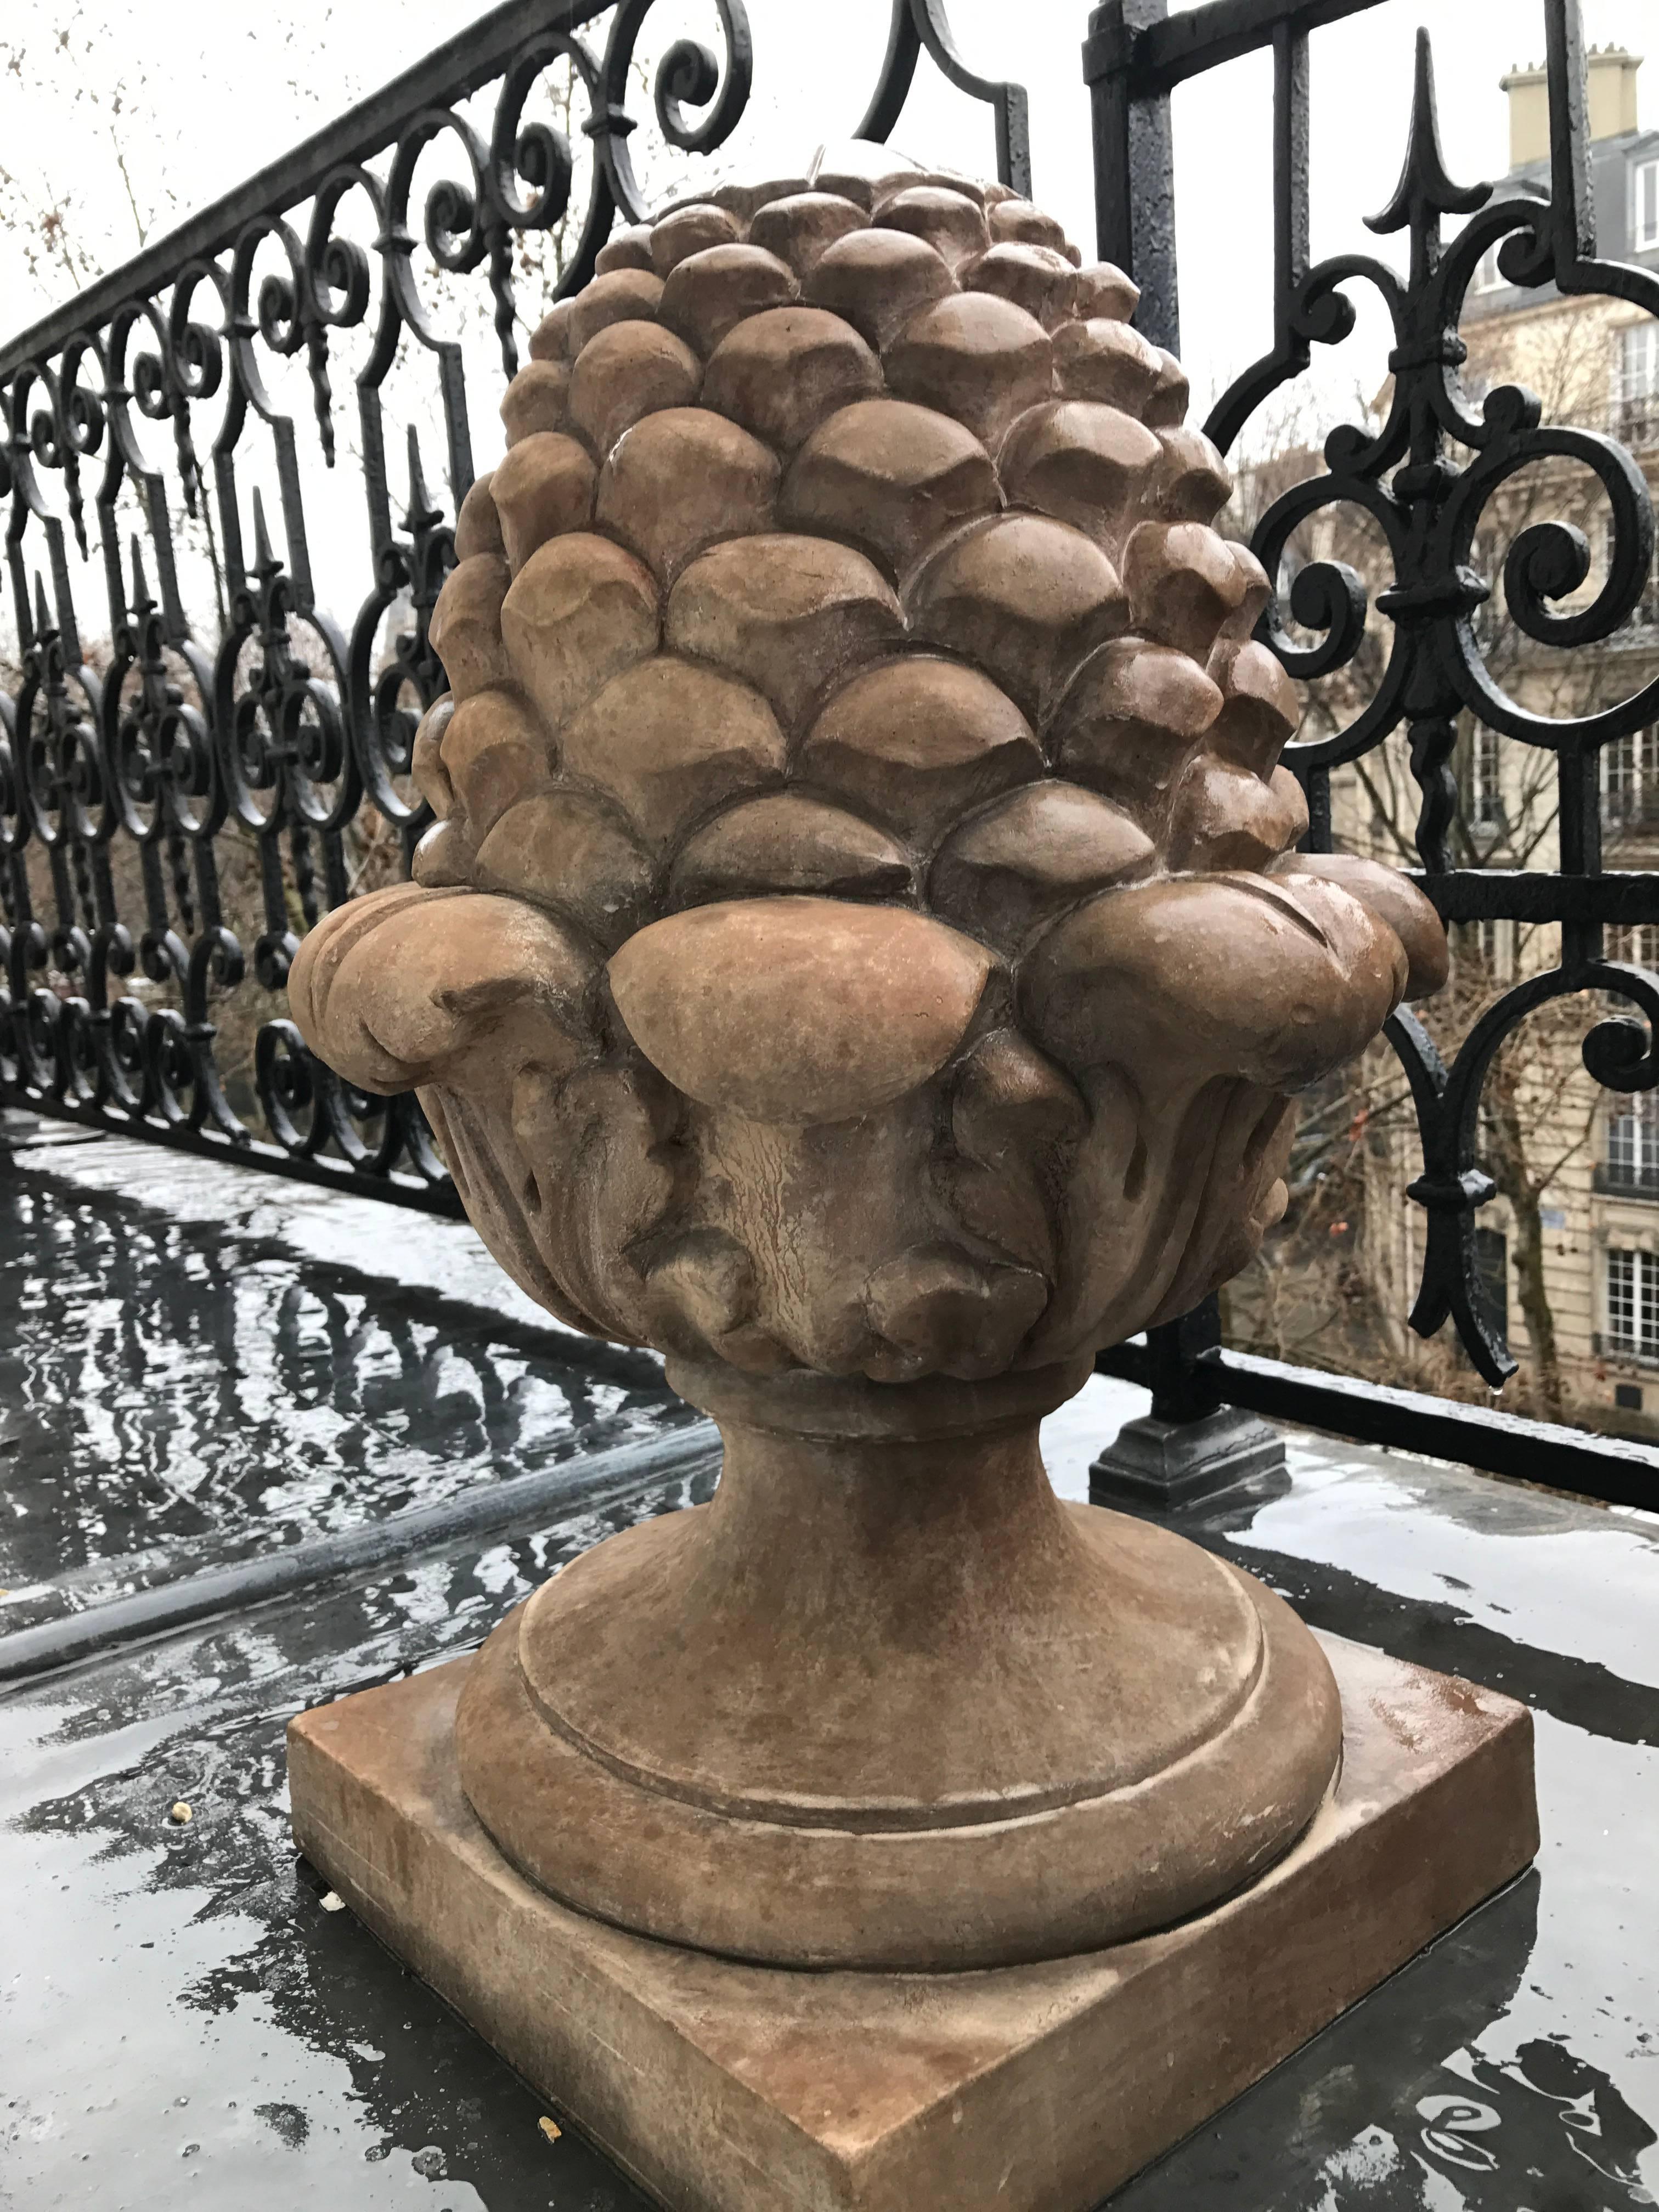 Pine cone in terracotta H 63 x 34 34 cm
The pine cone is a classic element of architecture in the south of France and Italy. It is a symbol of vital power and fertility. It is also associated with the cult of Bacchus, the god of wine.